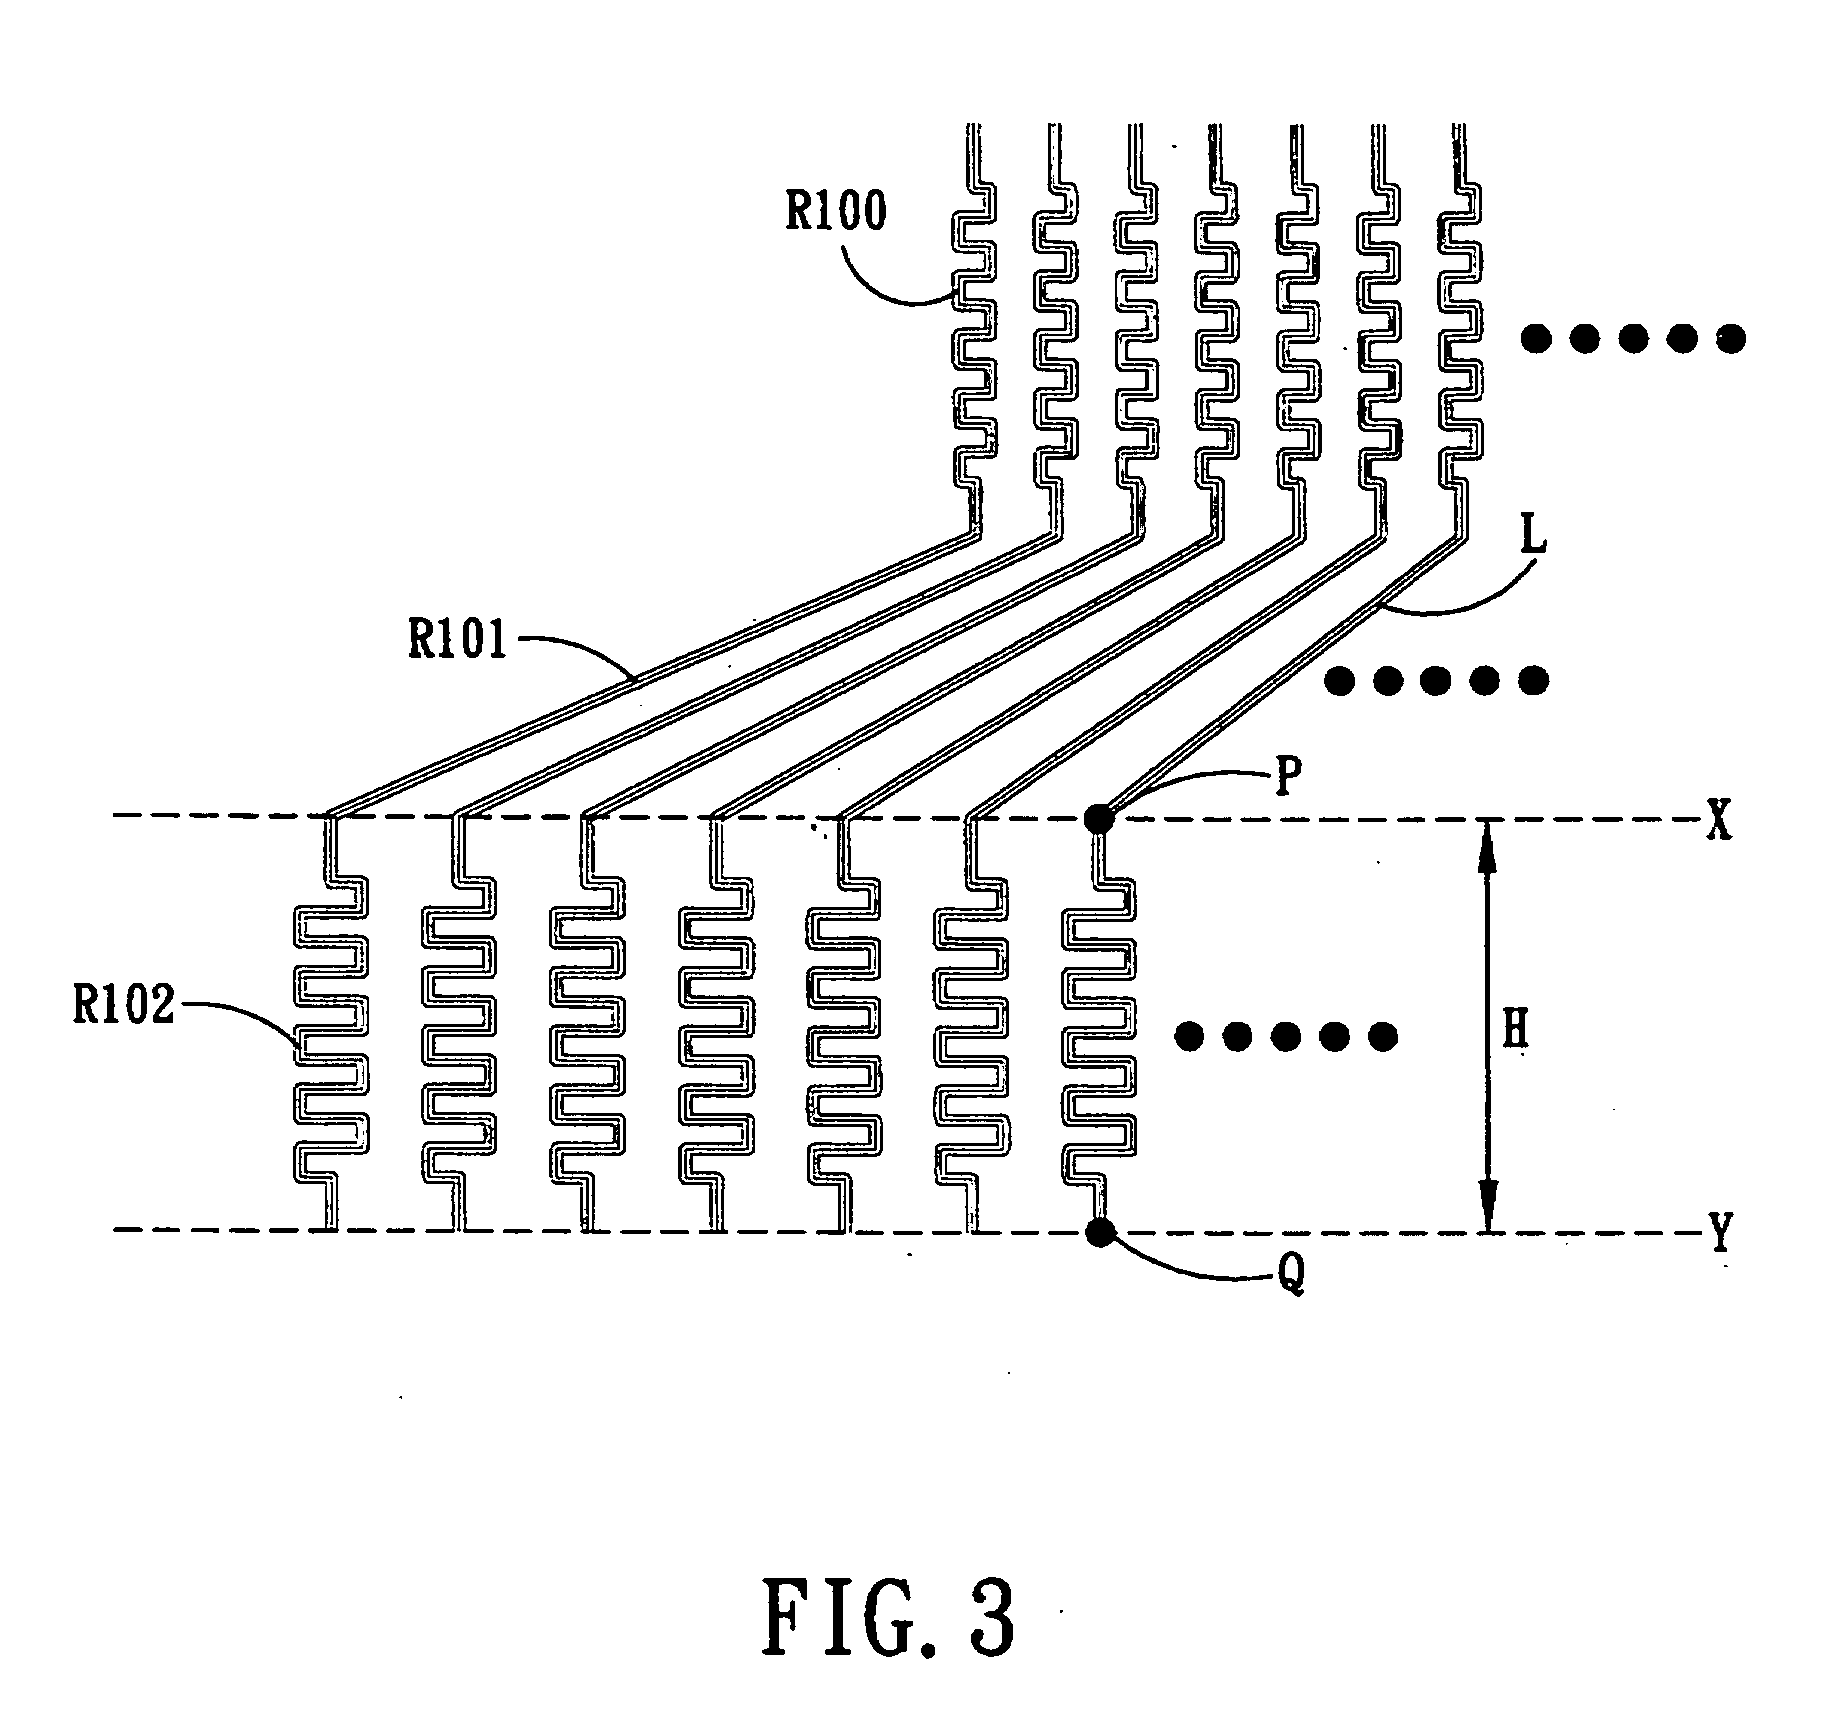 Electronic device with uniform-resistance fan-out blocks